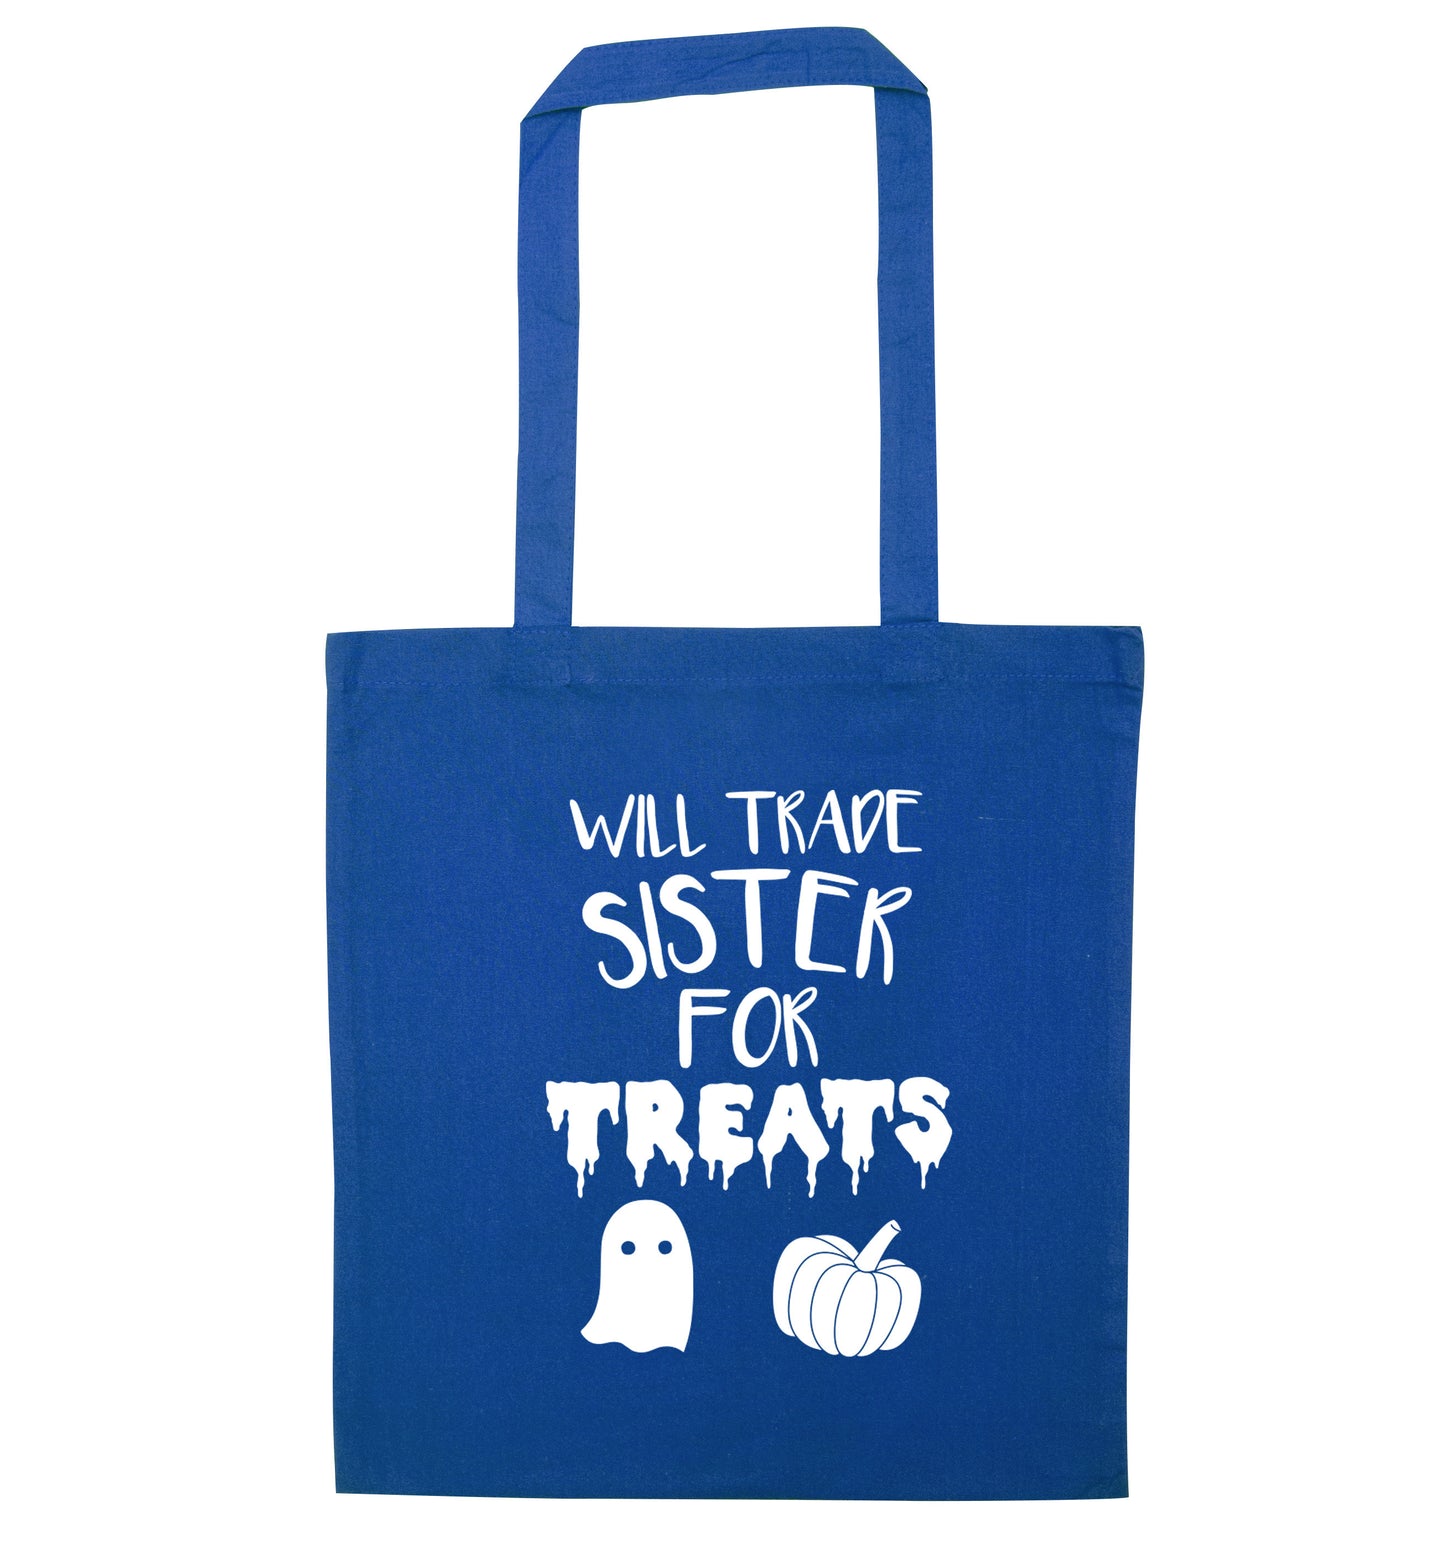 Will trade sister for treats blue tote bag